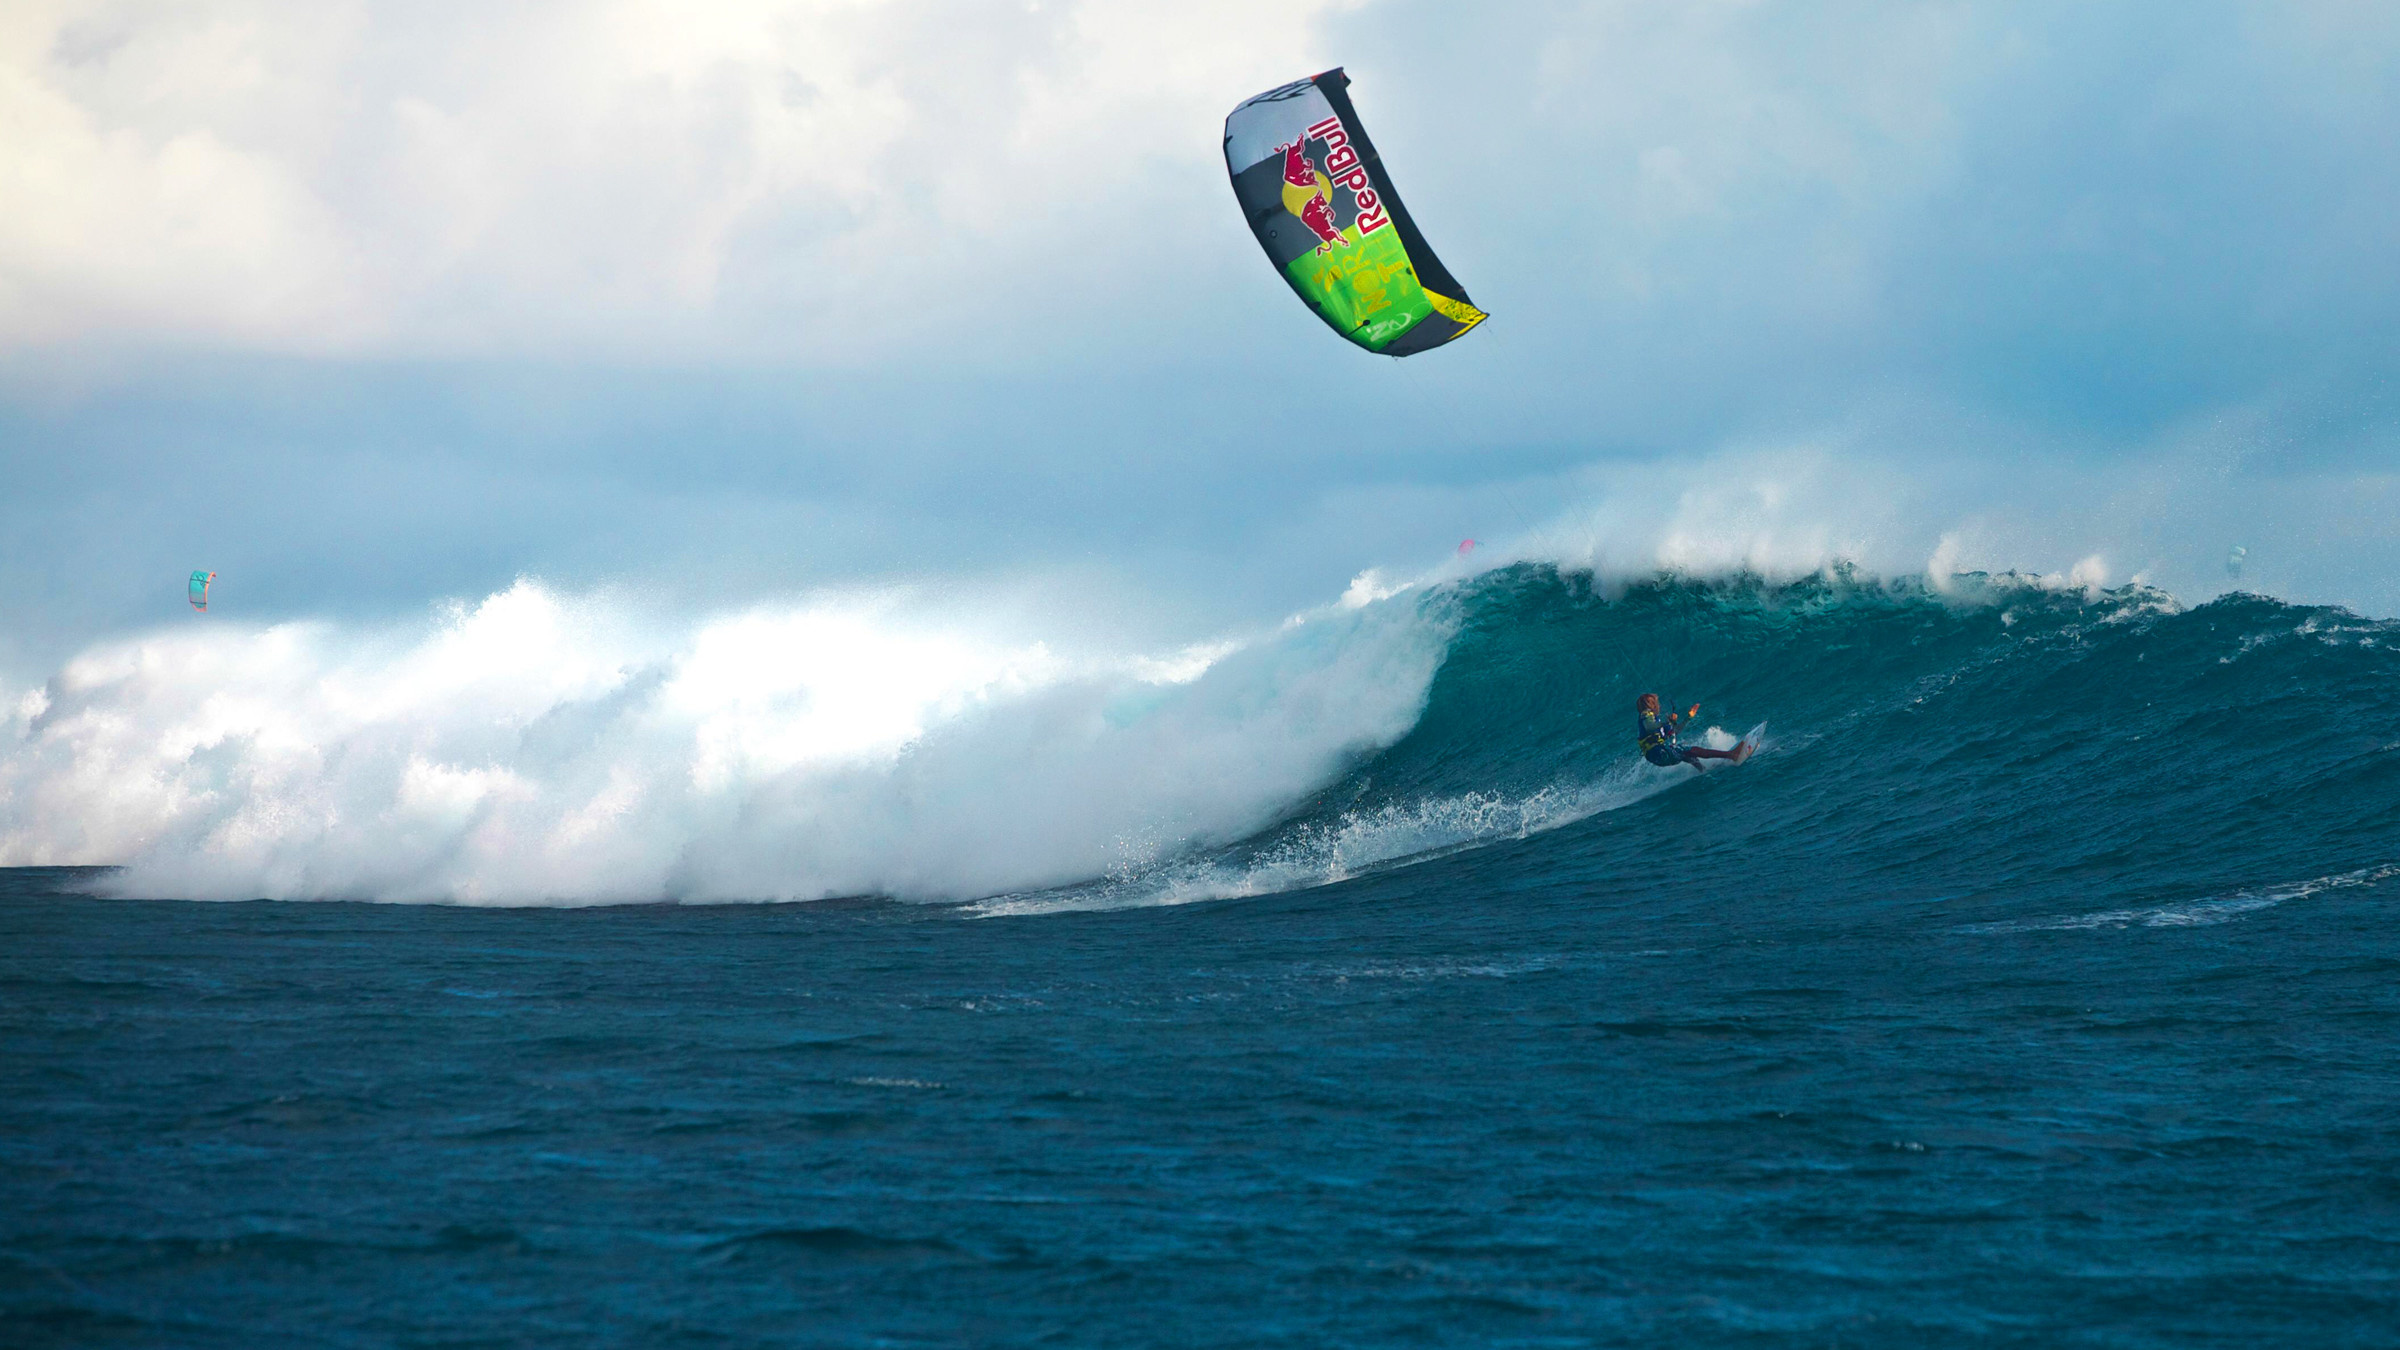 Kiteboarding: Kite steering in waves, Learning to kitesurf big waves, A synergy of wind and water. 2400x1350 HD Wallpaper.